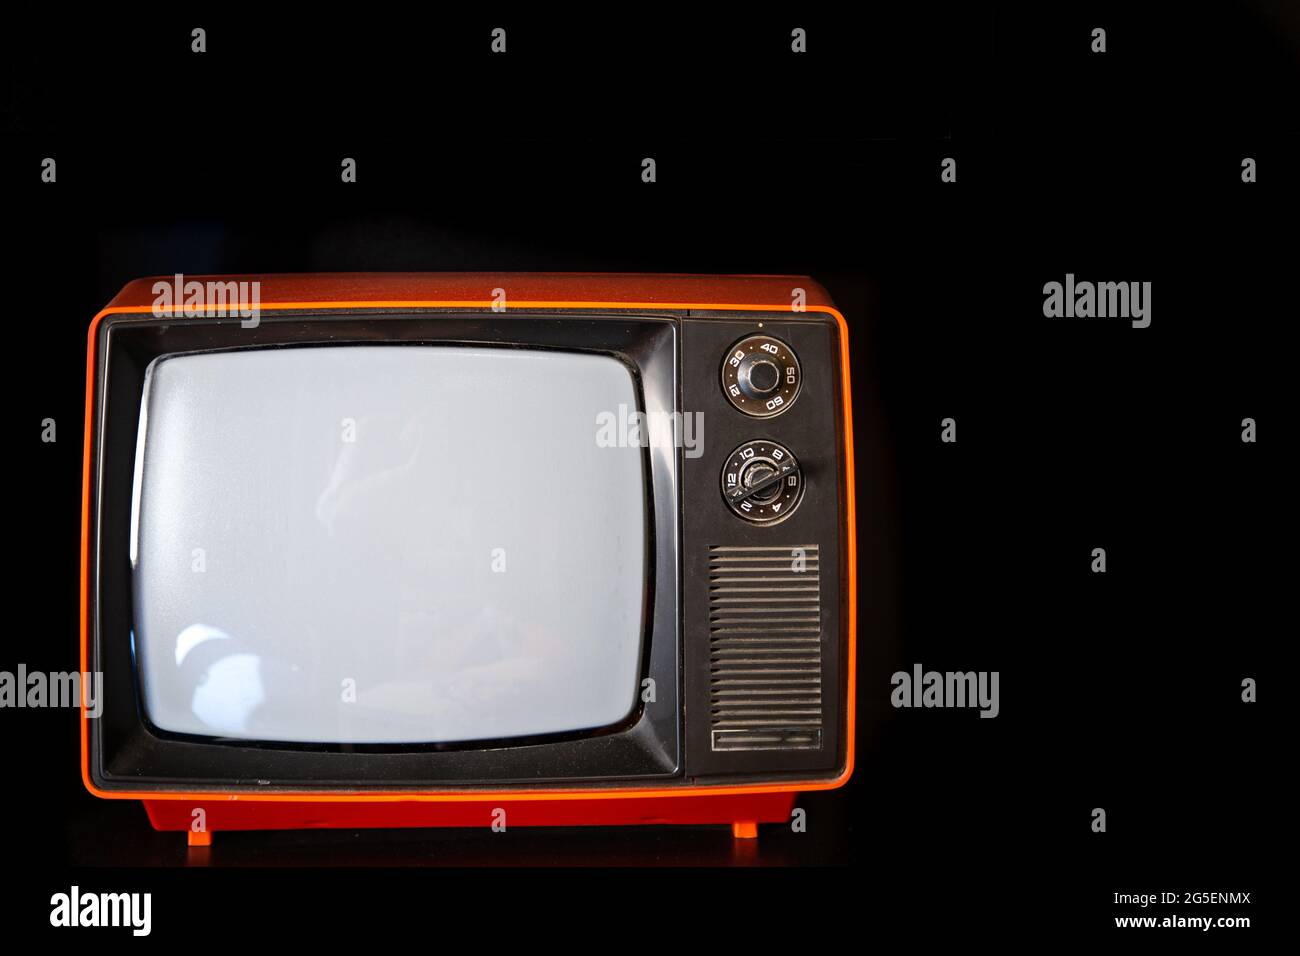 Old vintage red TV on dark background copy space. Stock Photo